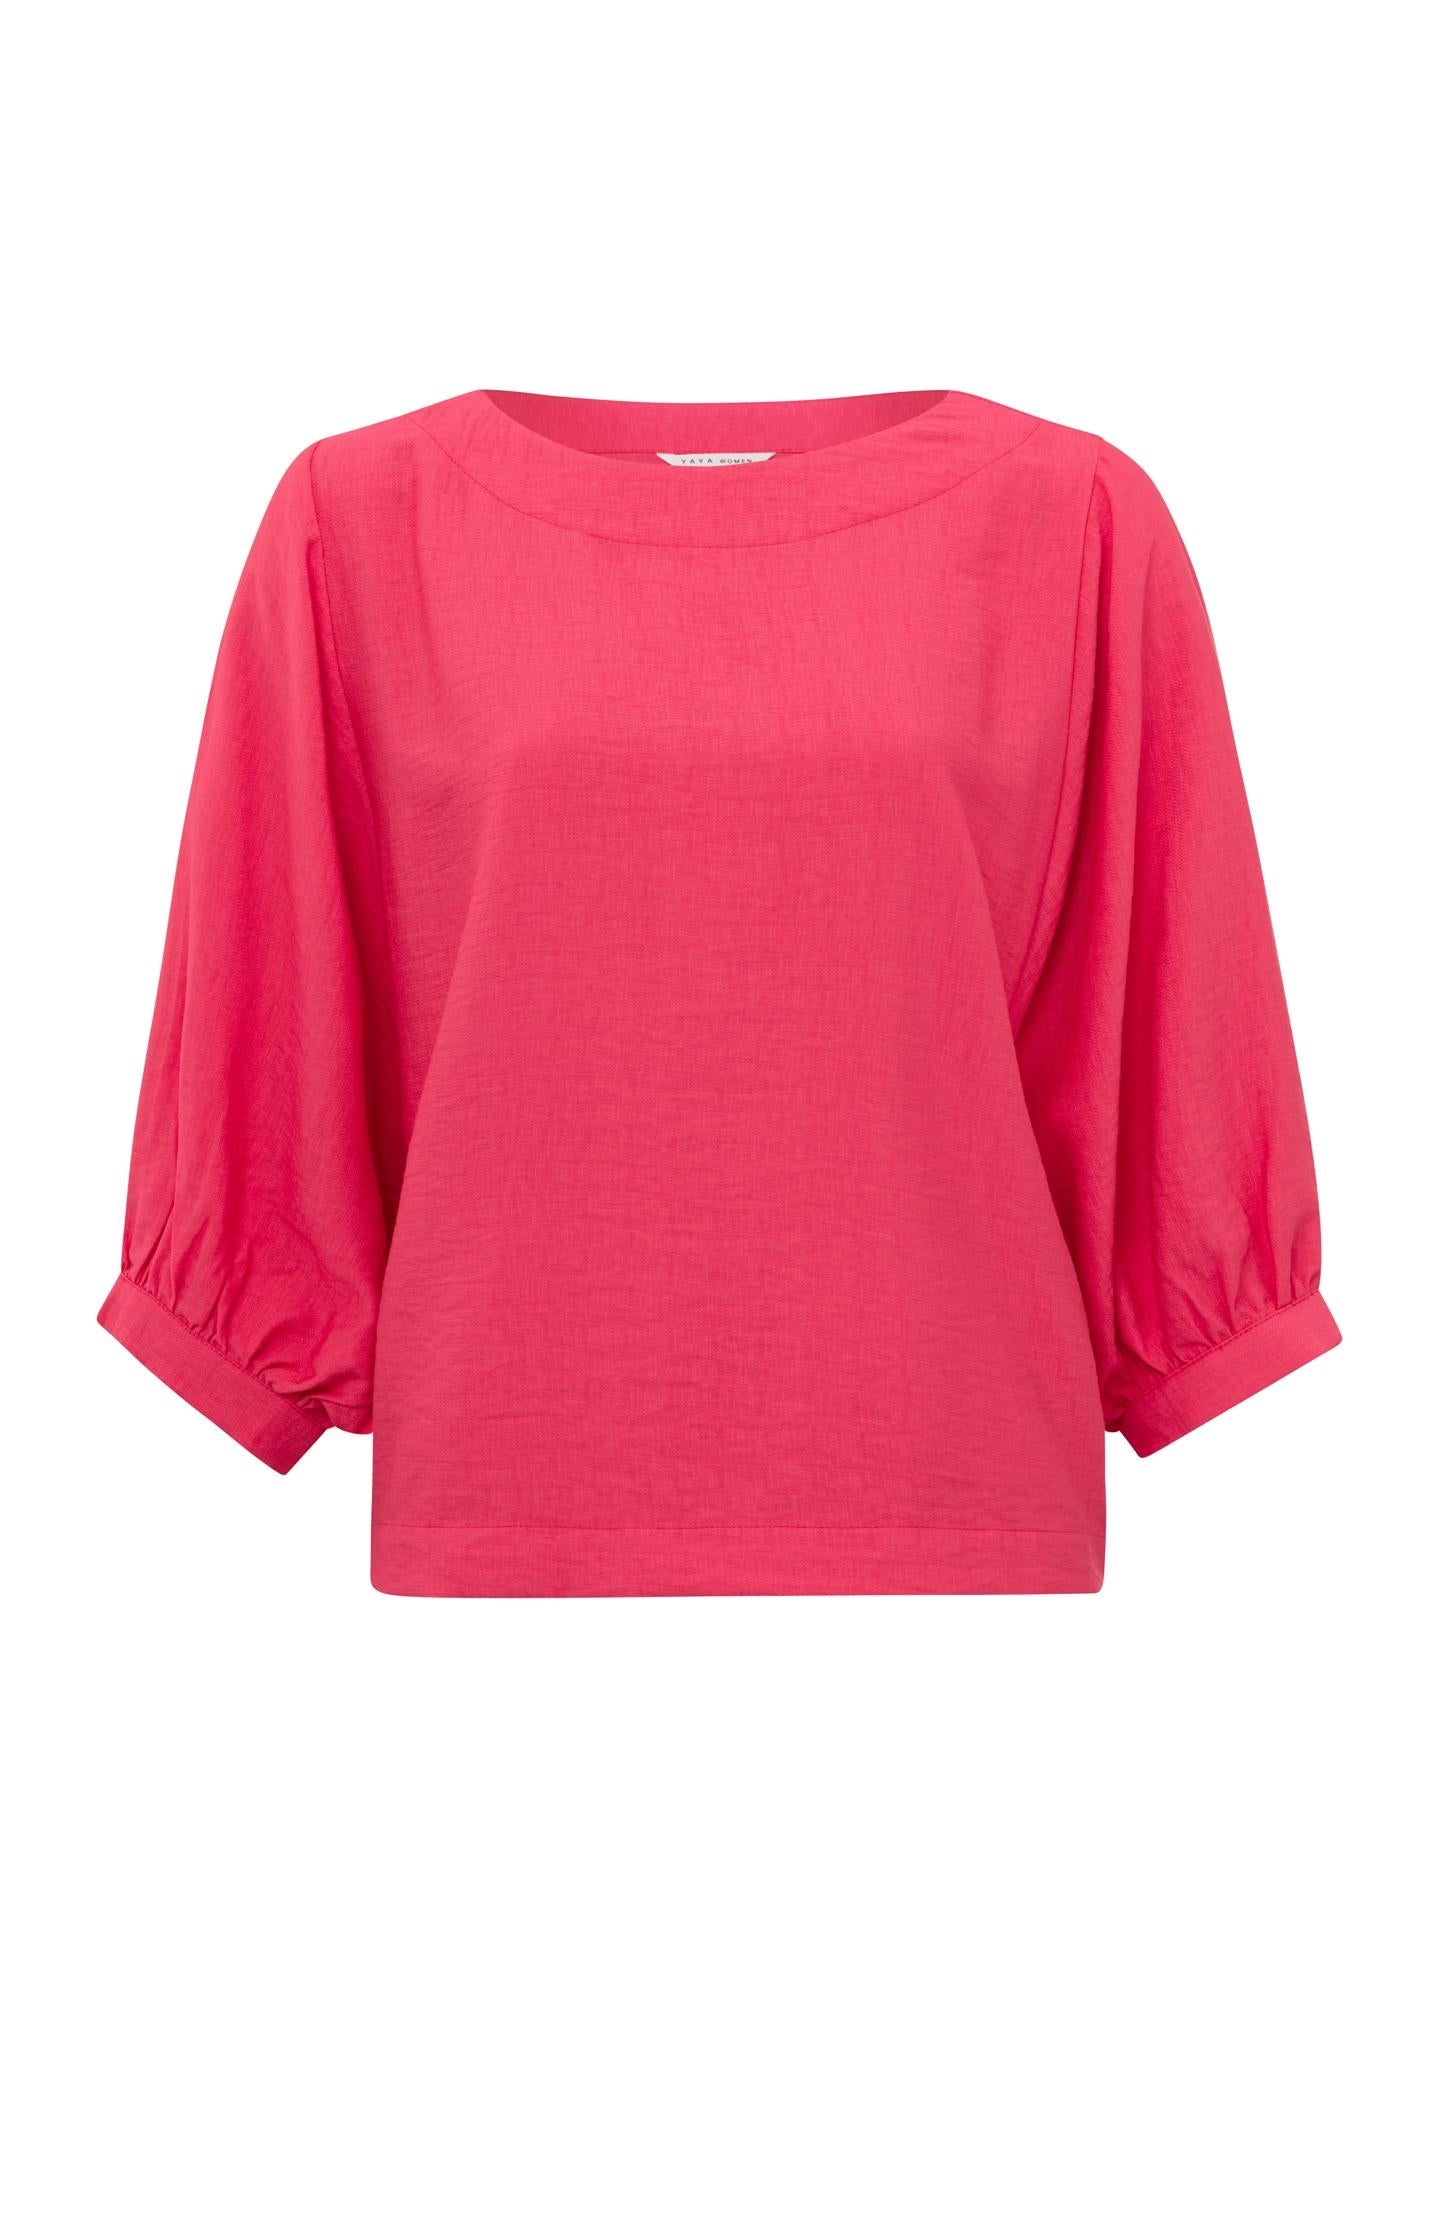 Batwing top with boatneck and long sleeves in wide fit - Type: product